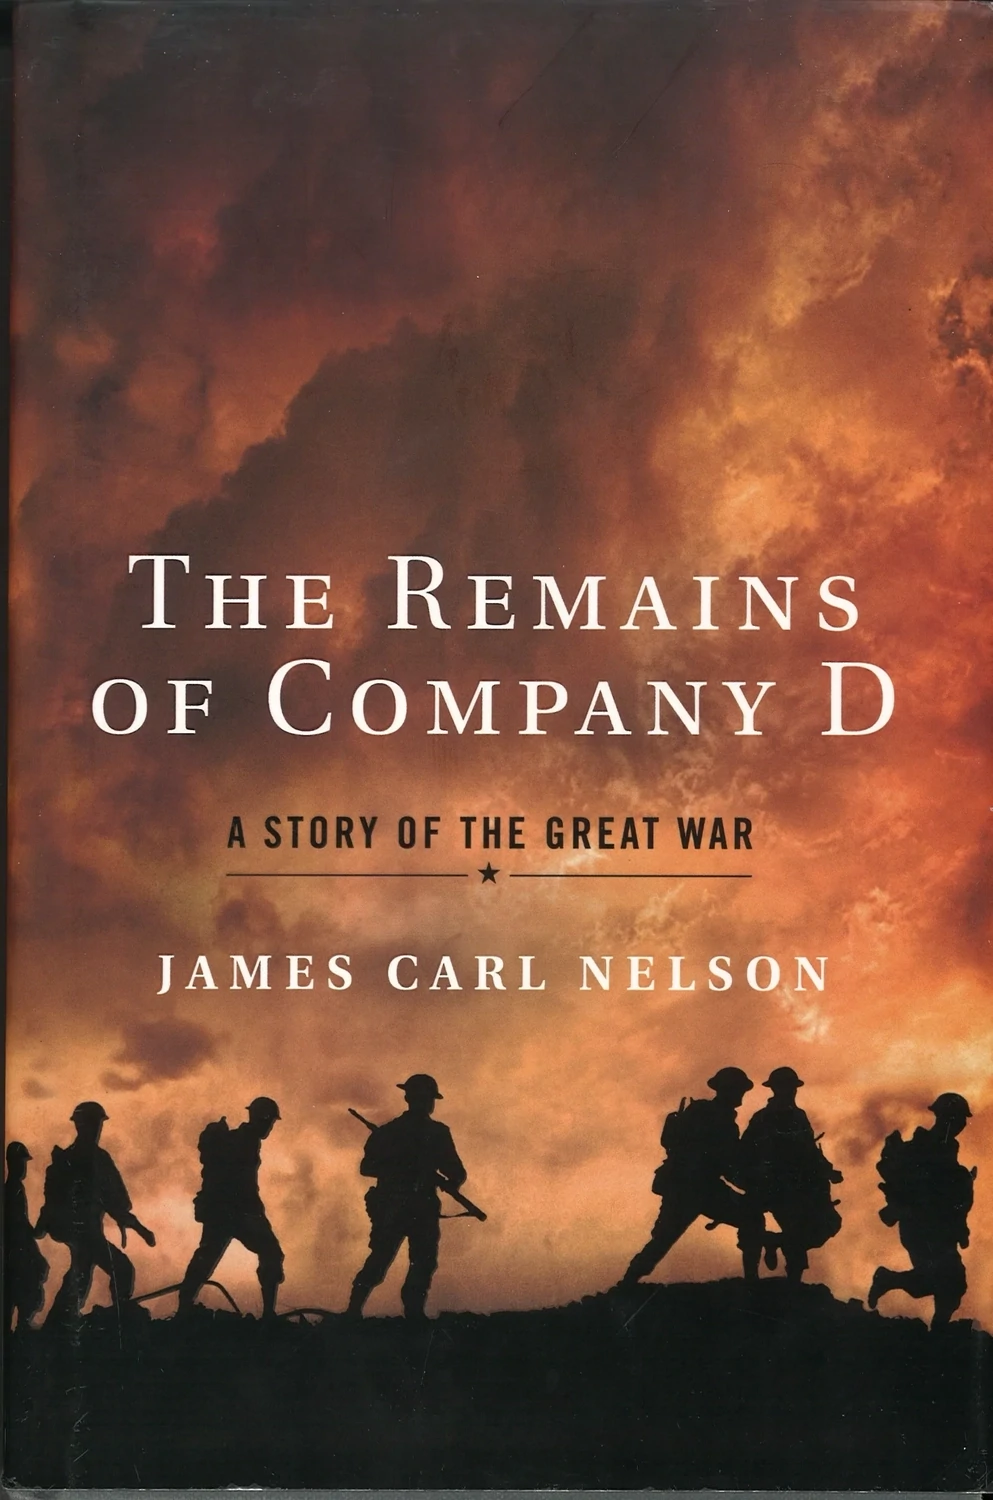 The Remains of Company D by James Carl Nelson